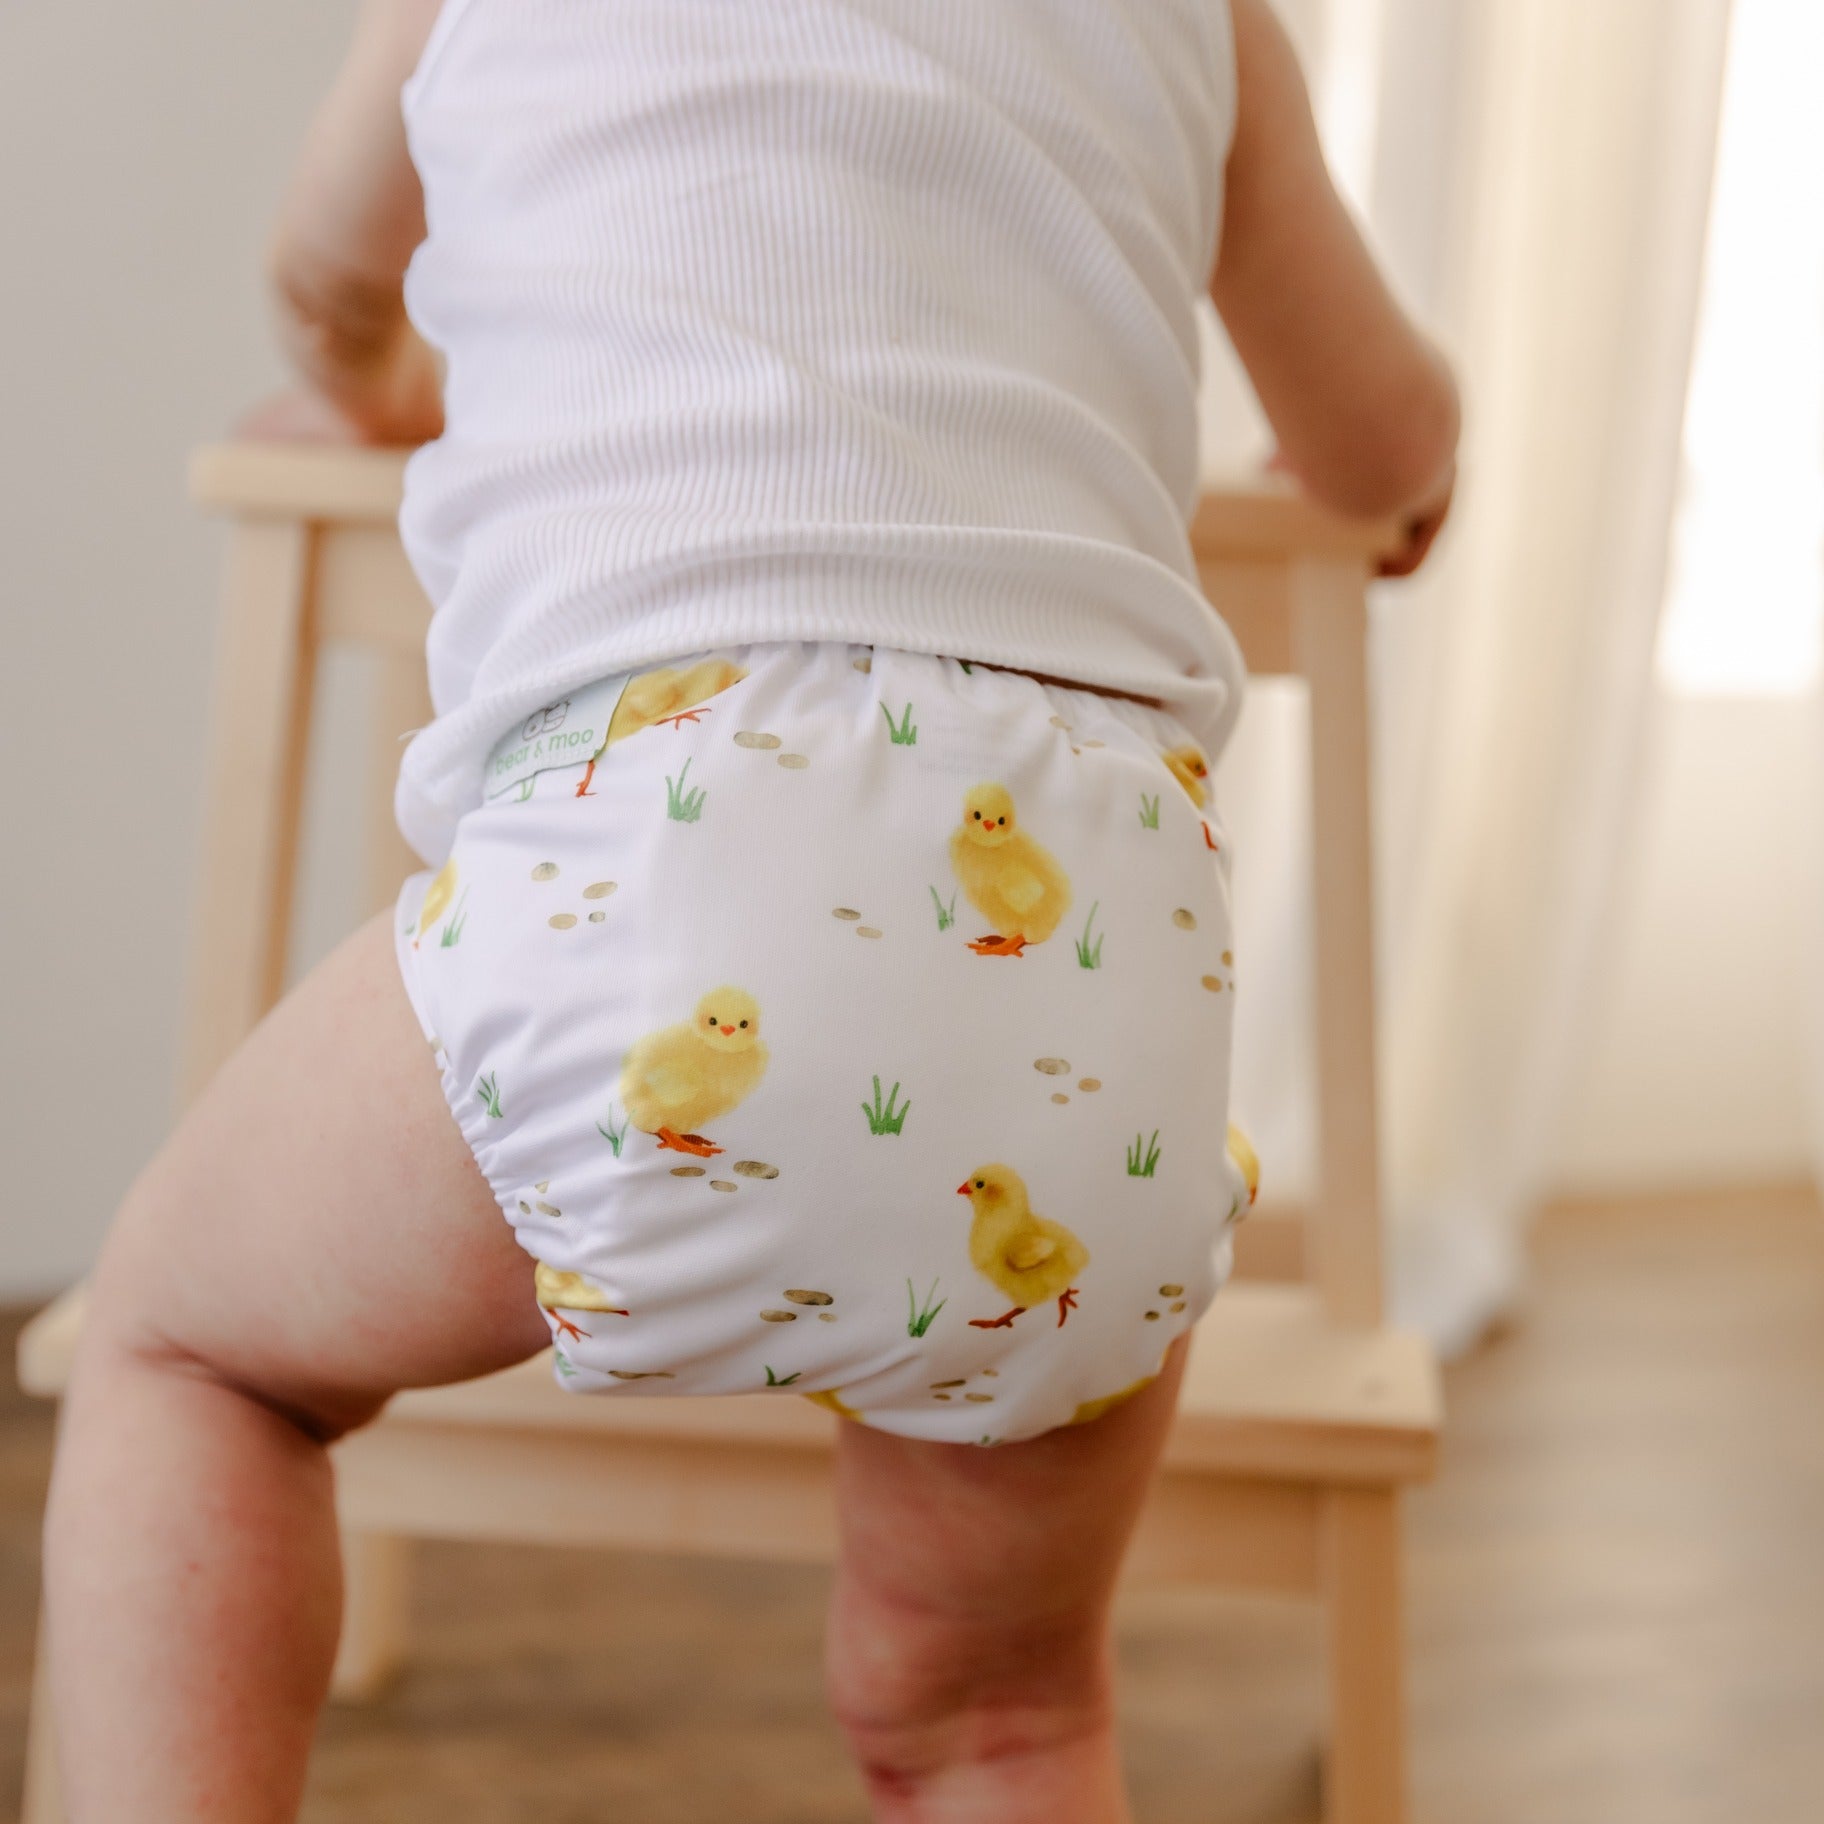 Bear & Moo Reusable Cloth Nappy in One Size Fits Most | Little Chicks print